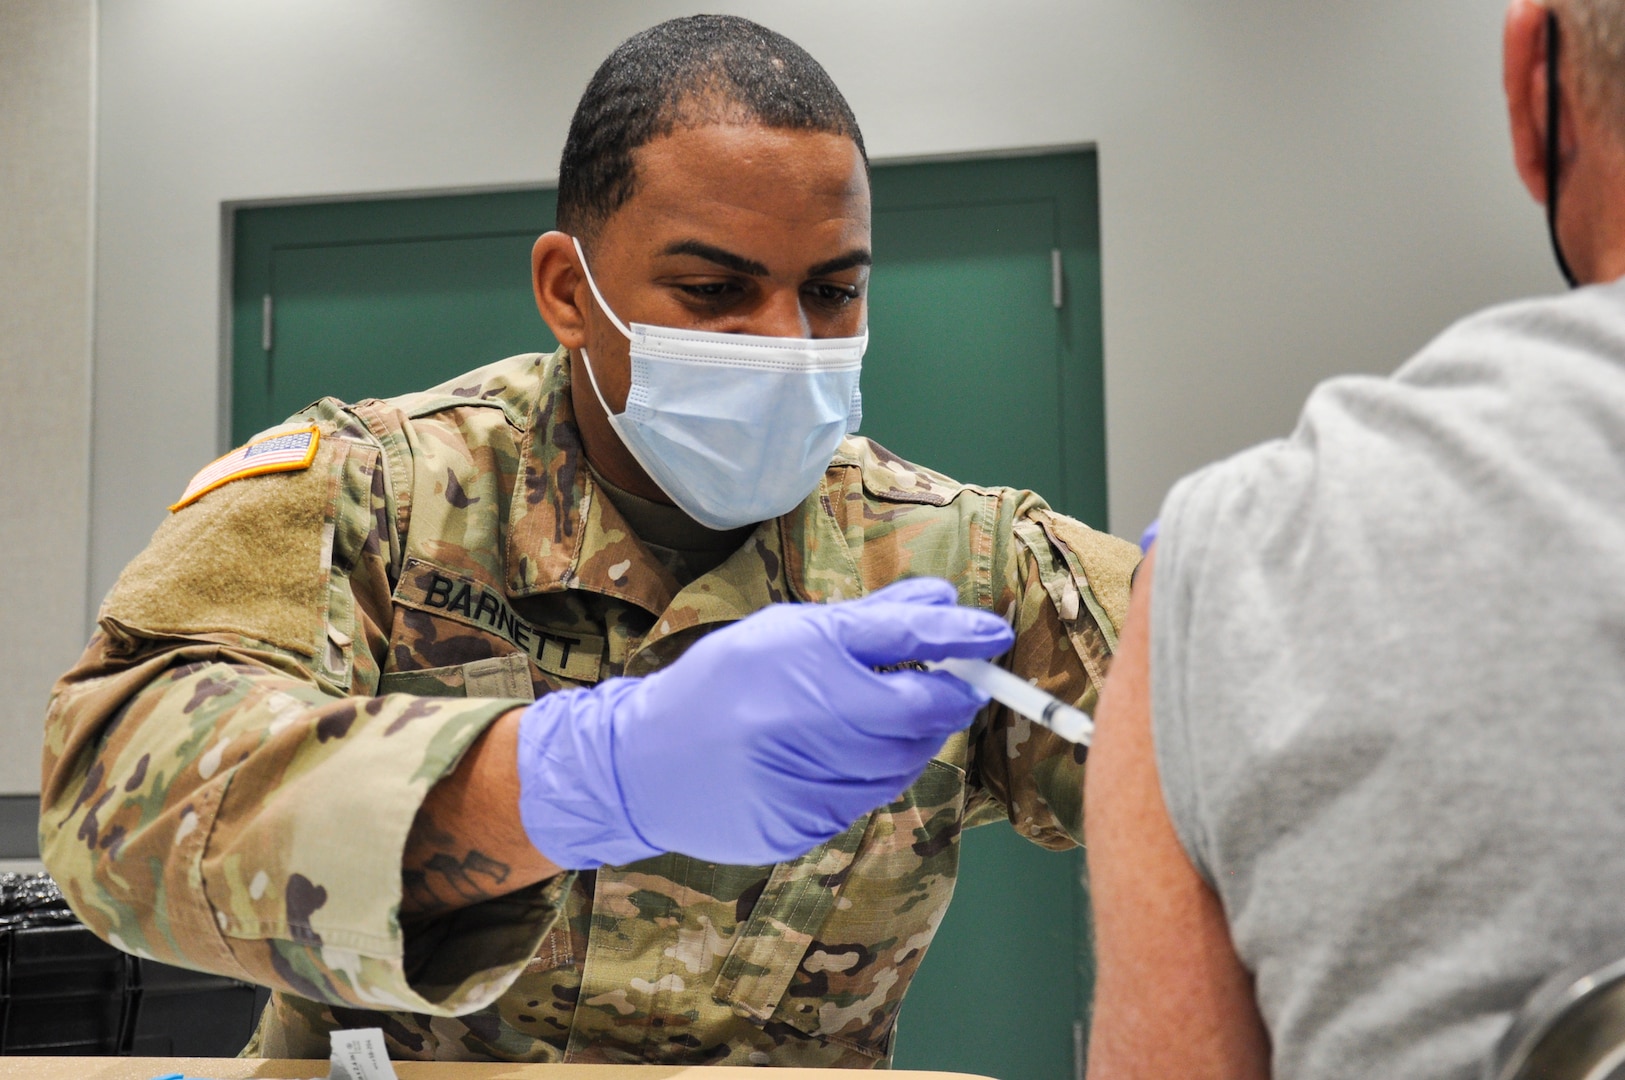 Nevada National Guard Spc. Demetrie Barnett with Joint Task Force 17 administers the Pfizer vaccine to residents at the Cora Coleman Senior Center, Feb. 16, 2021, in Las Vegas.